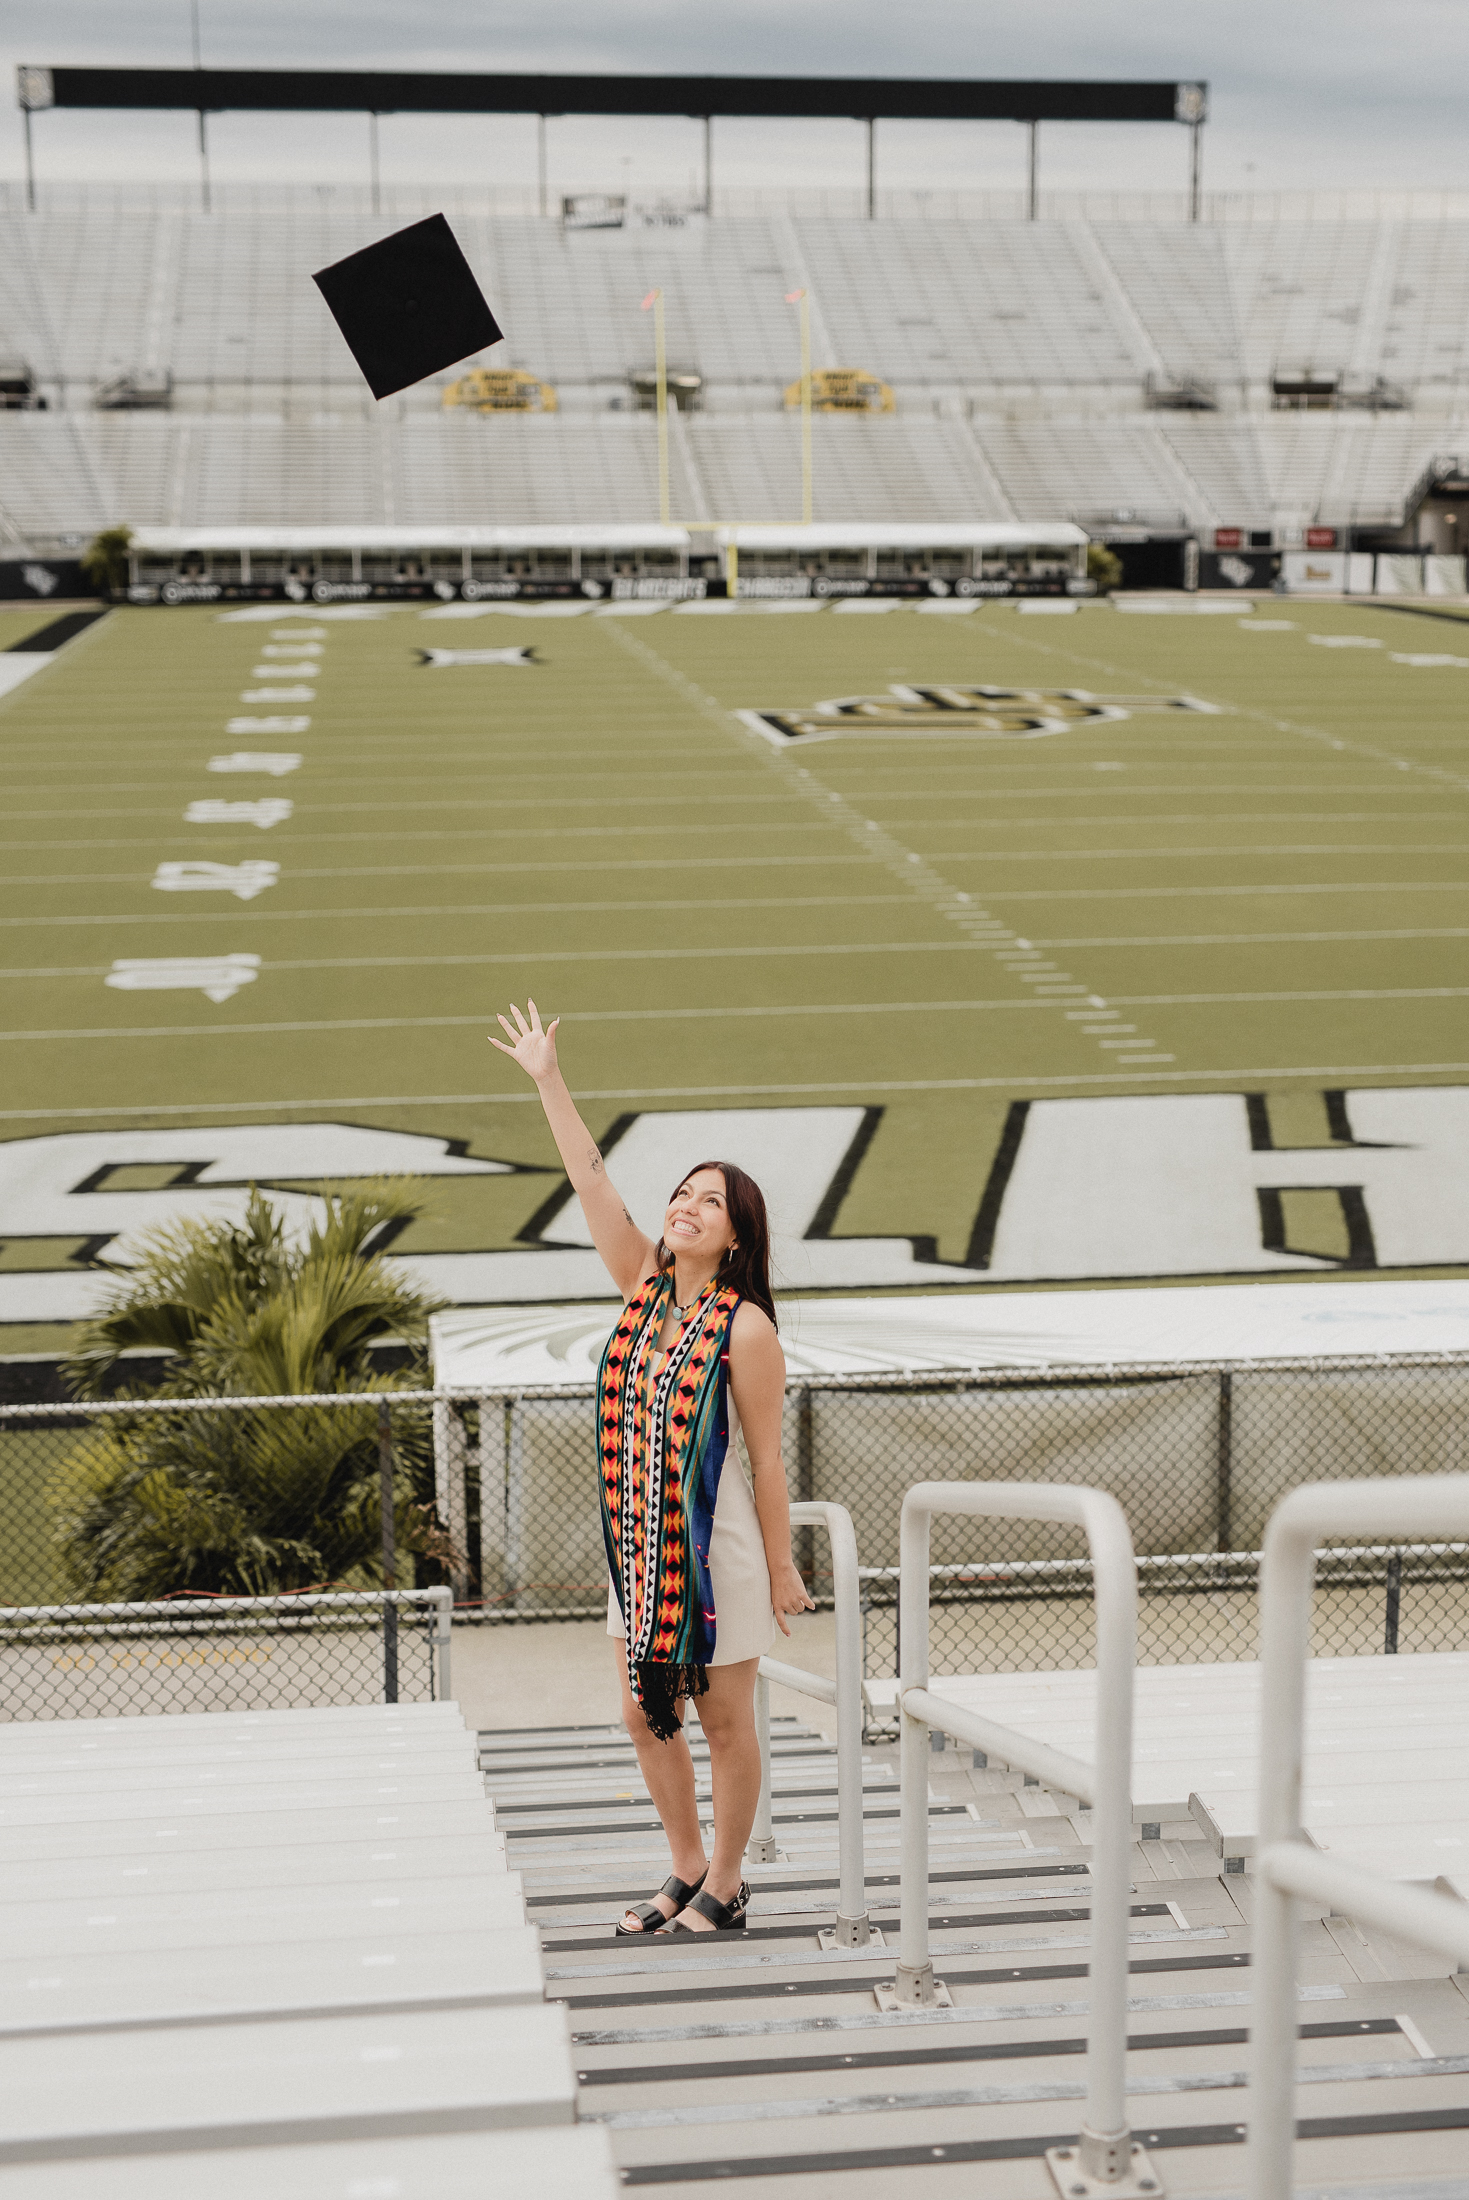 local ucf orlando graduation photographer photography packages grad university of central florida photography